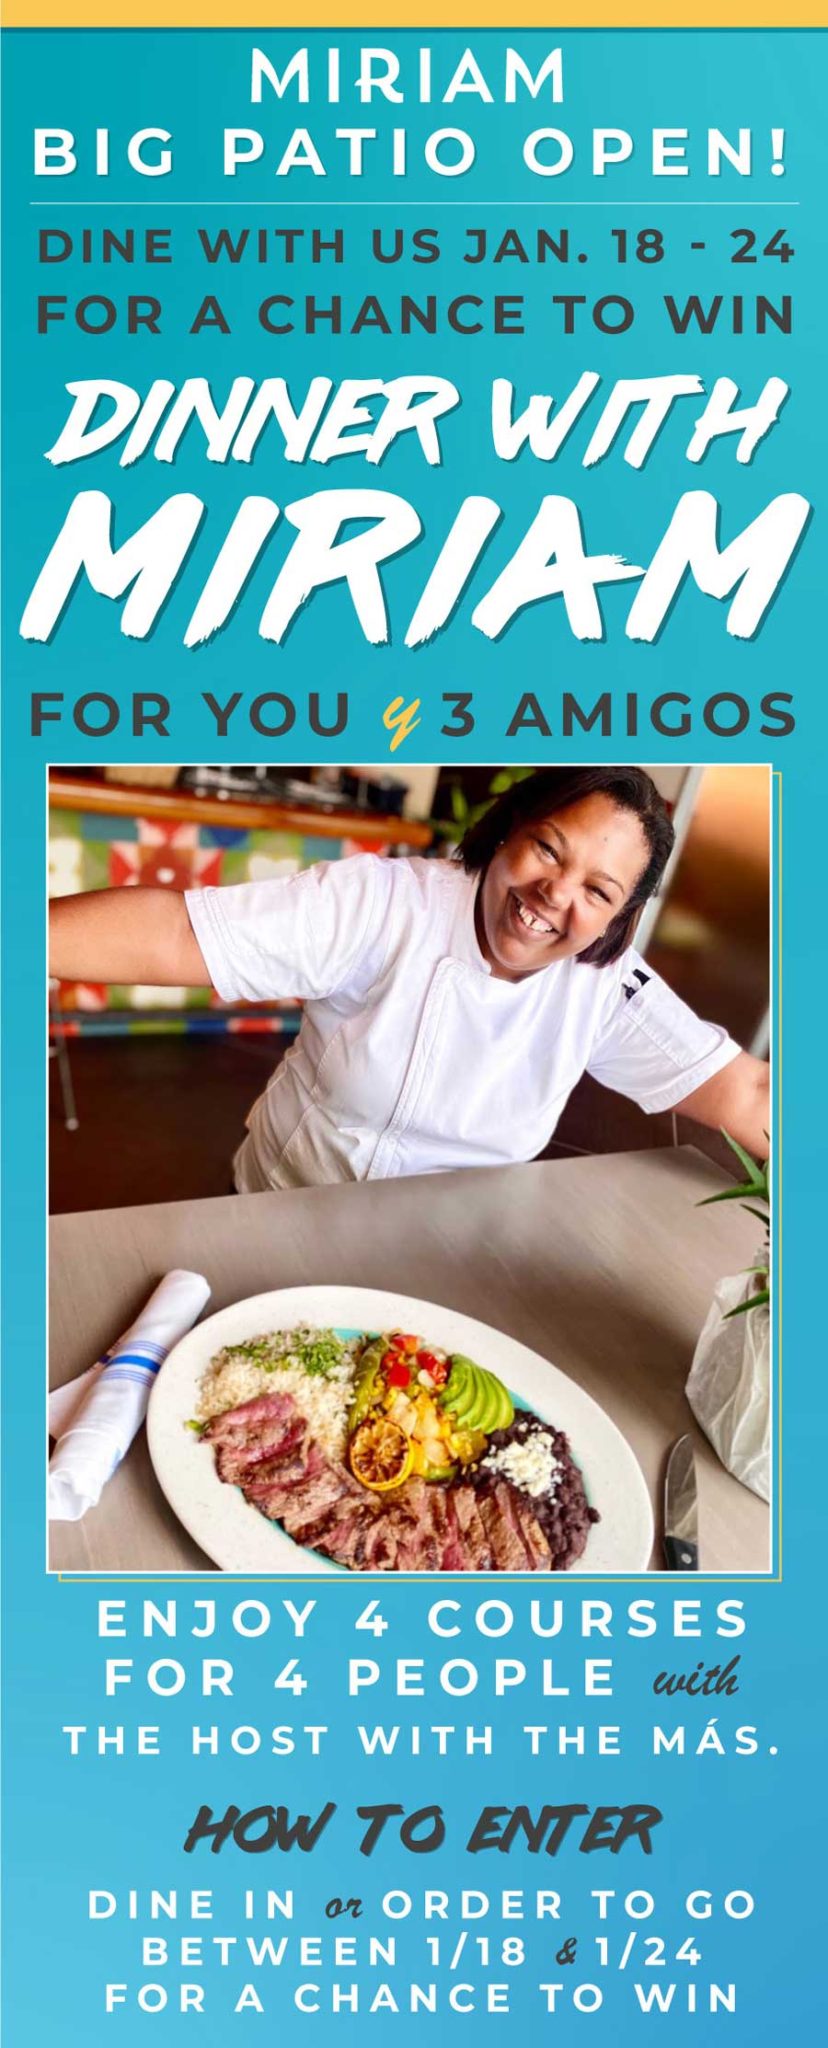 Dine with us Jan 18 - 24 for a chance to win dinner with miriam for you and 3 amigos